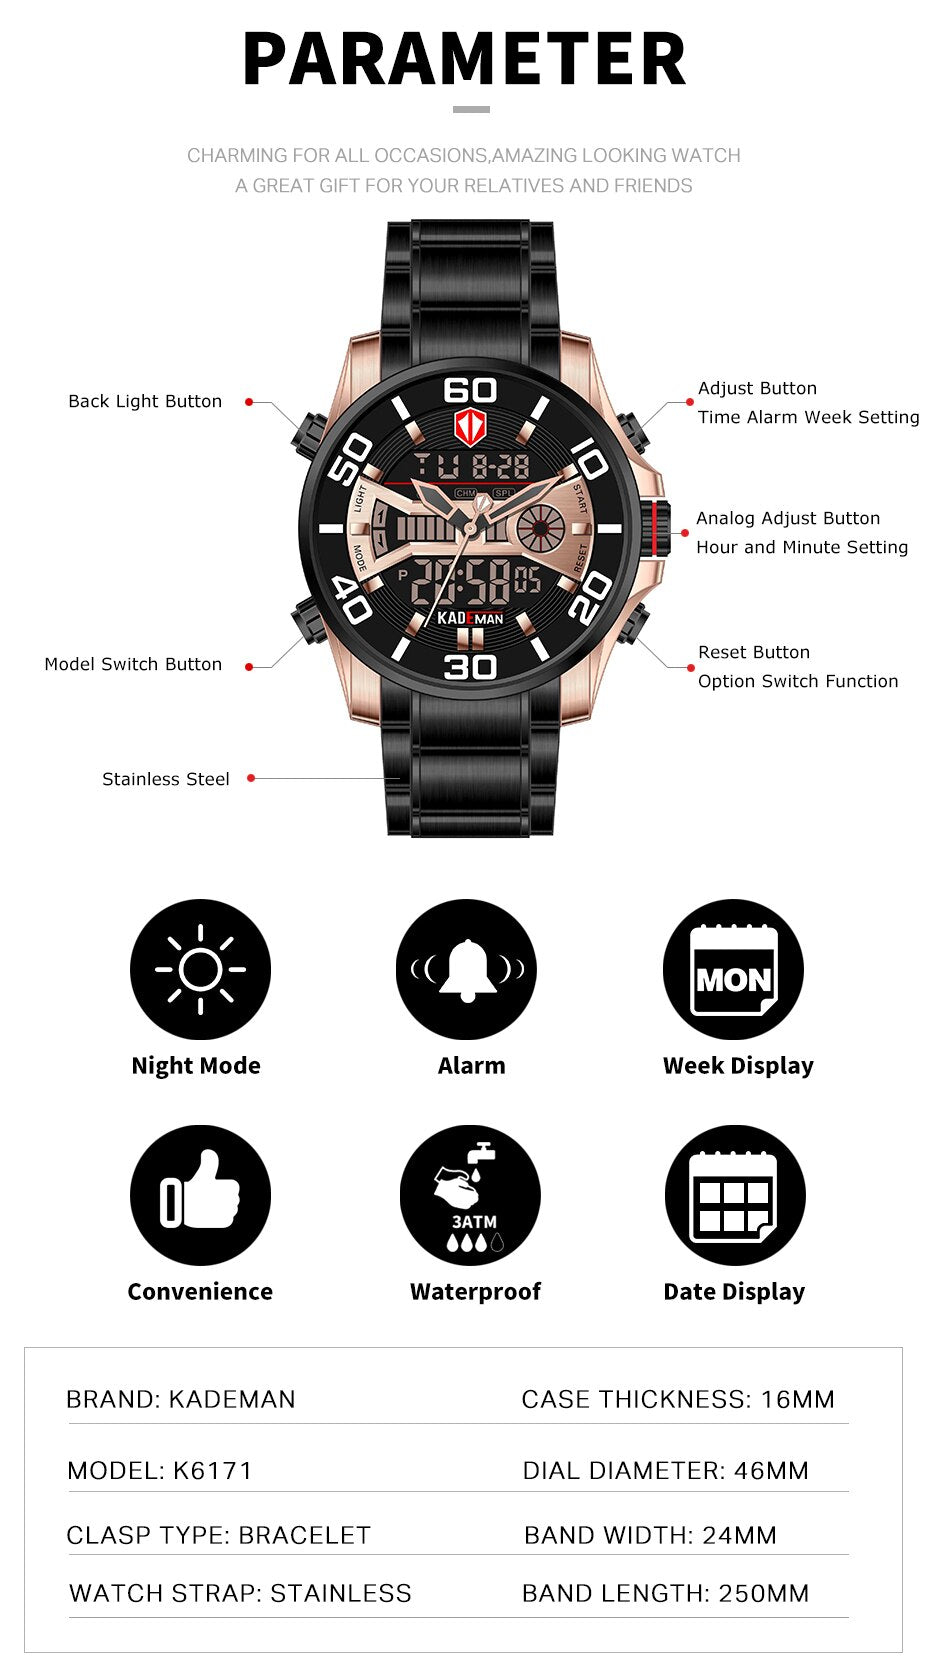 YSYH Men Army Sport Watches Male Military Stainless Quartz Clock Top Brand Mens LED Analog Digital Watch Relogio Masculino